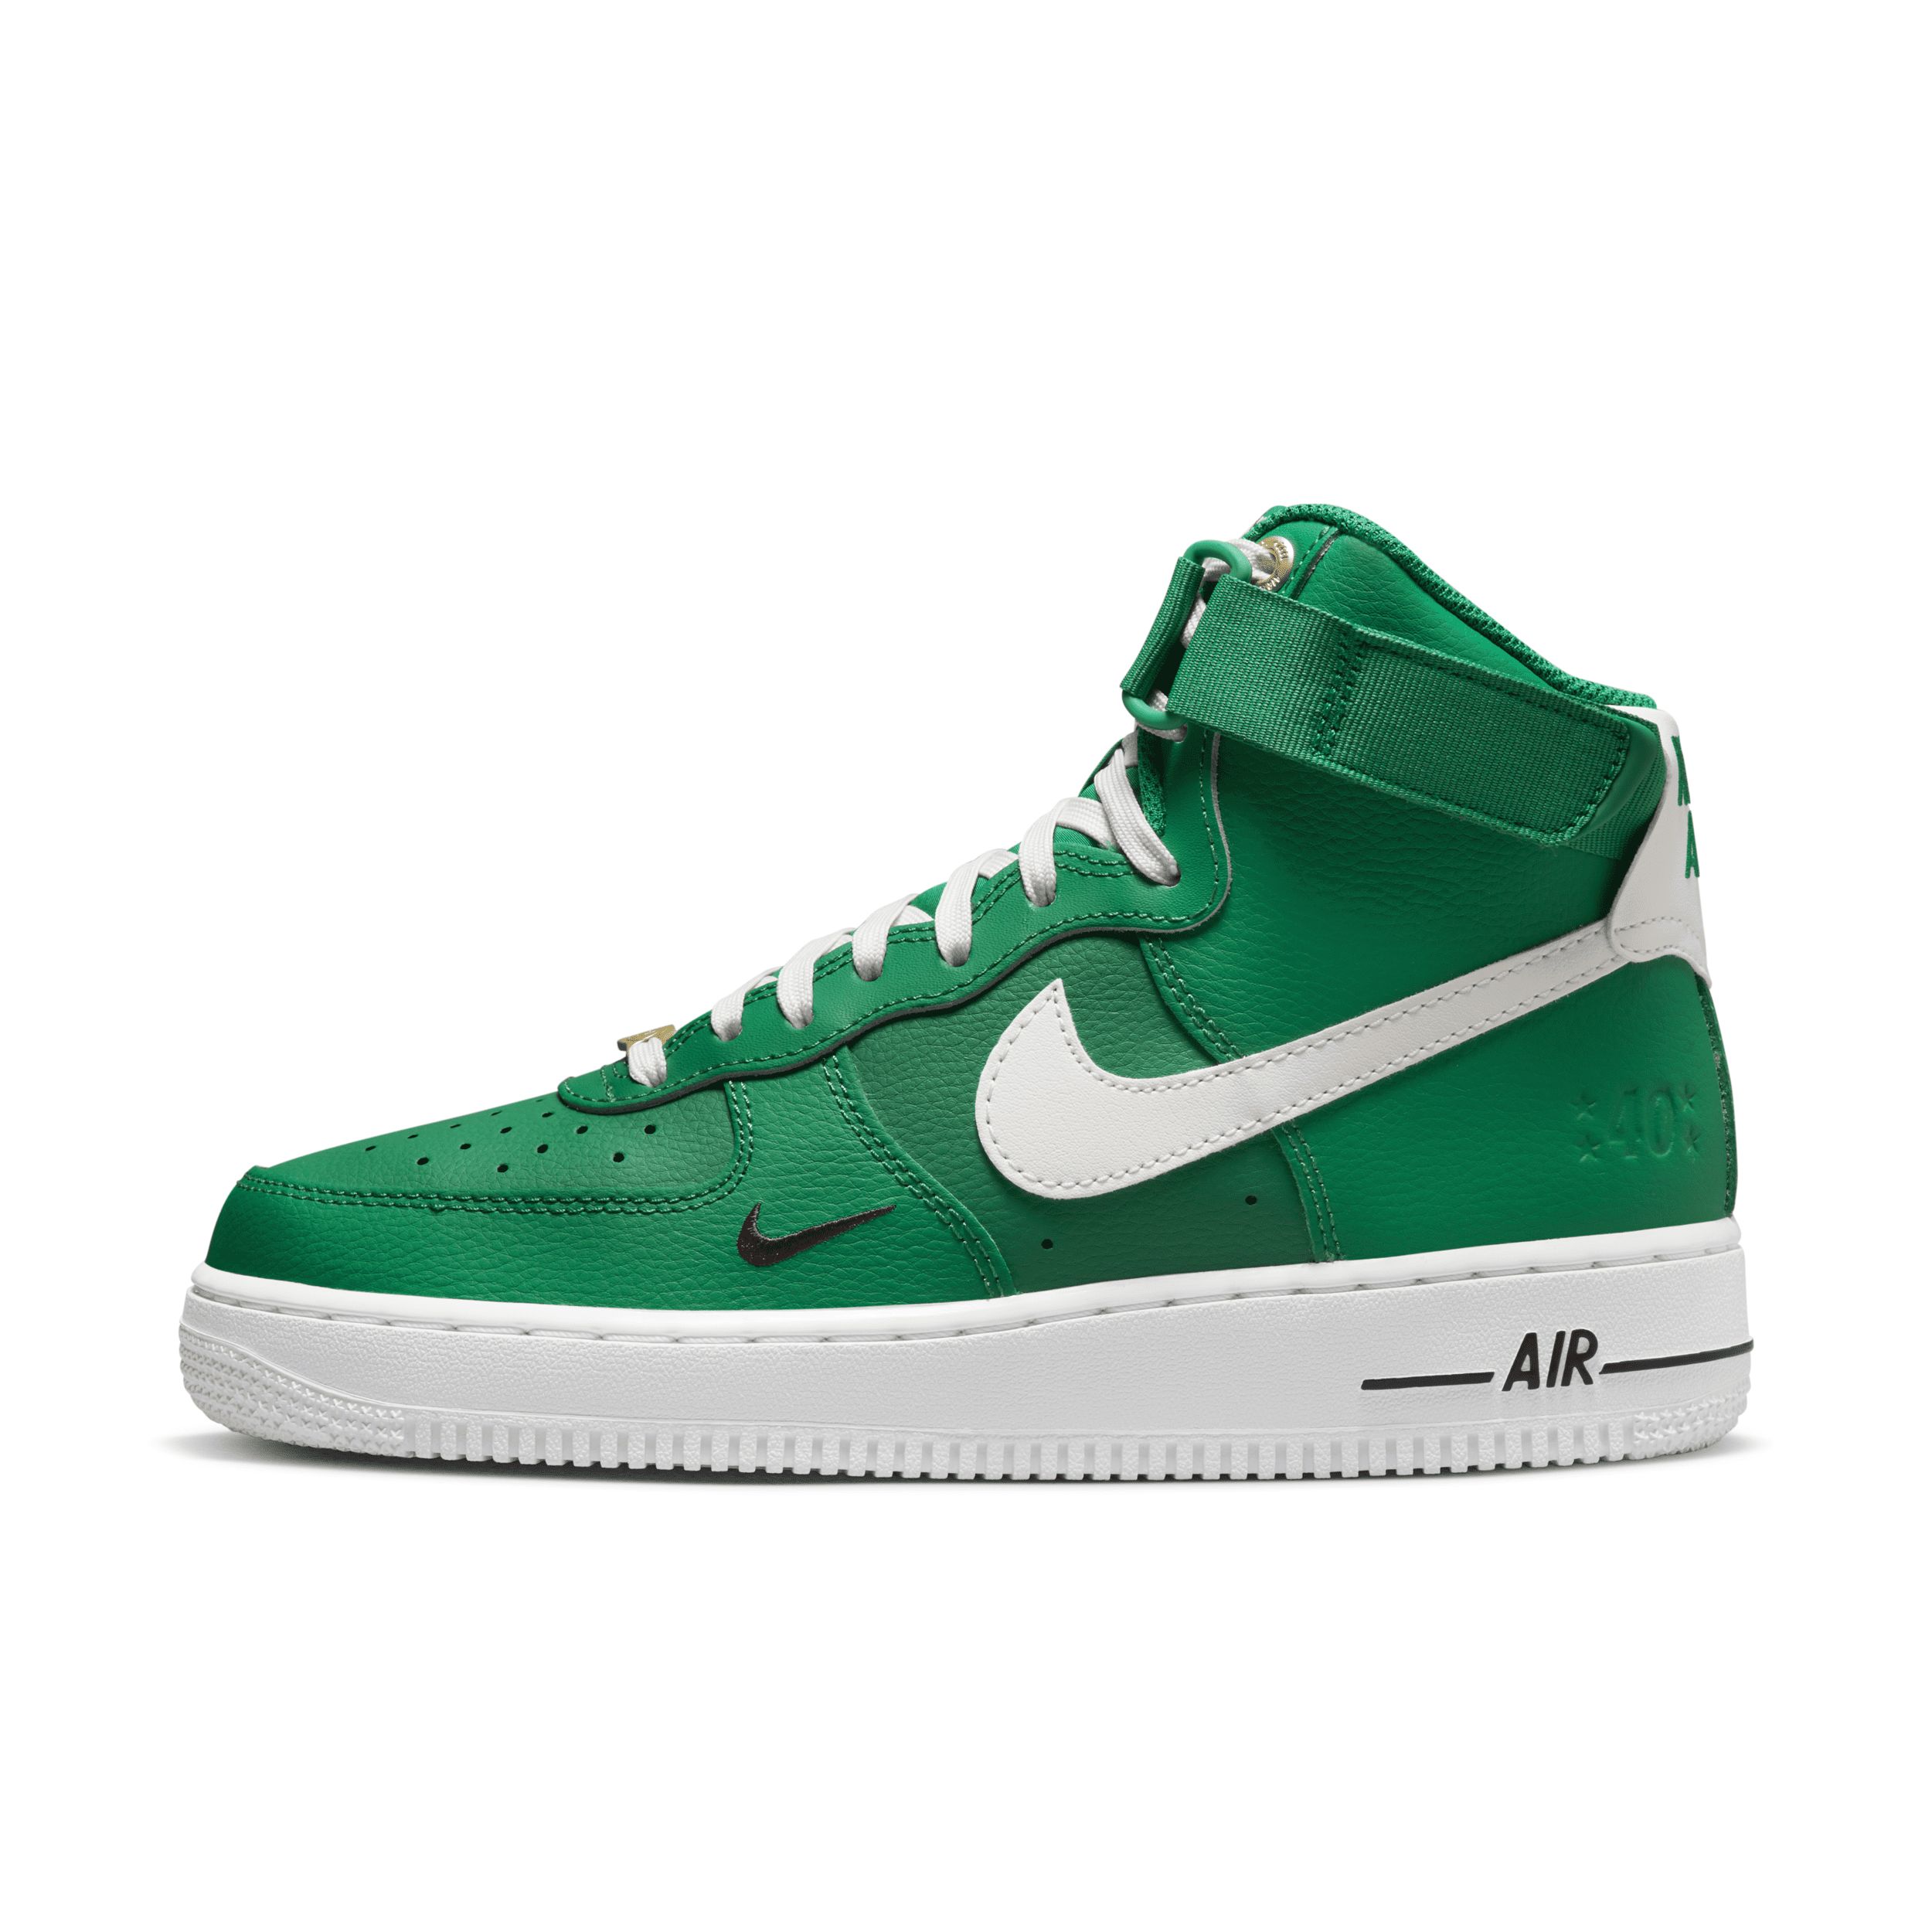 Nike Women's Air Force 1 High SE Shoes in Green, Size: 5.5 | DQ7584-300 | Nike (US)